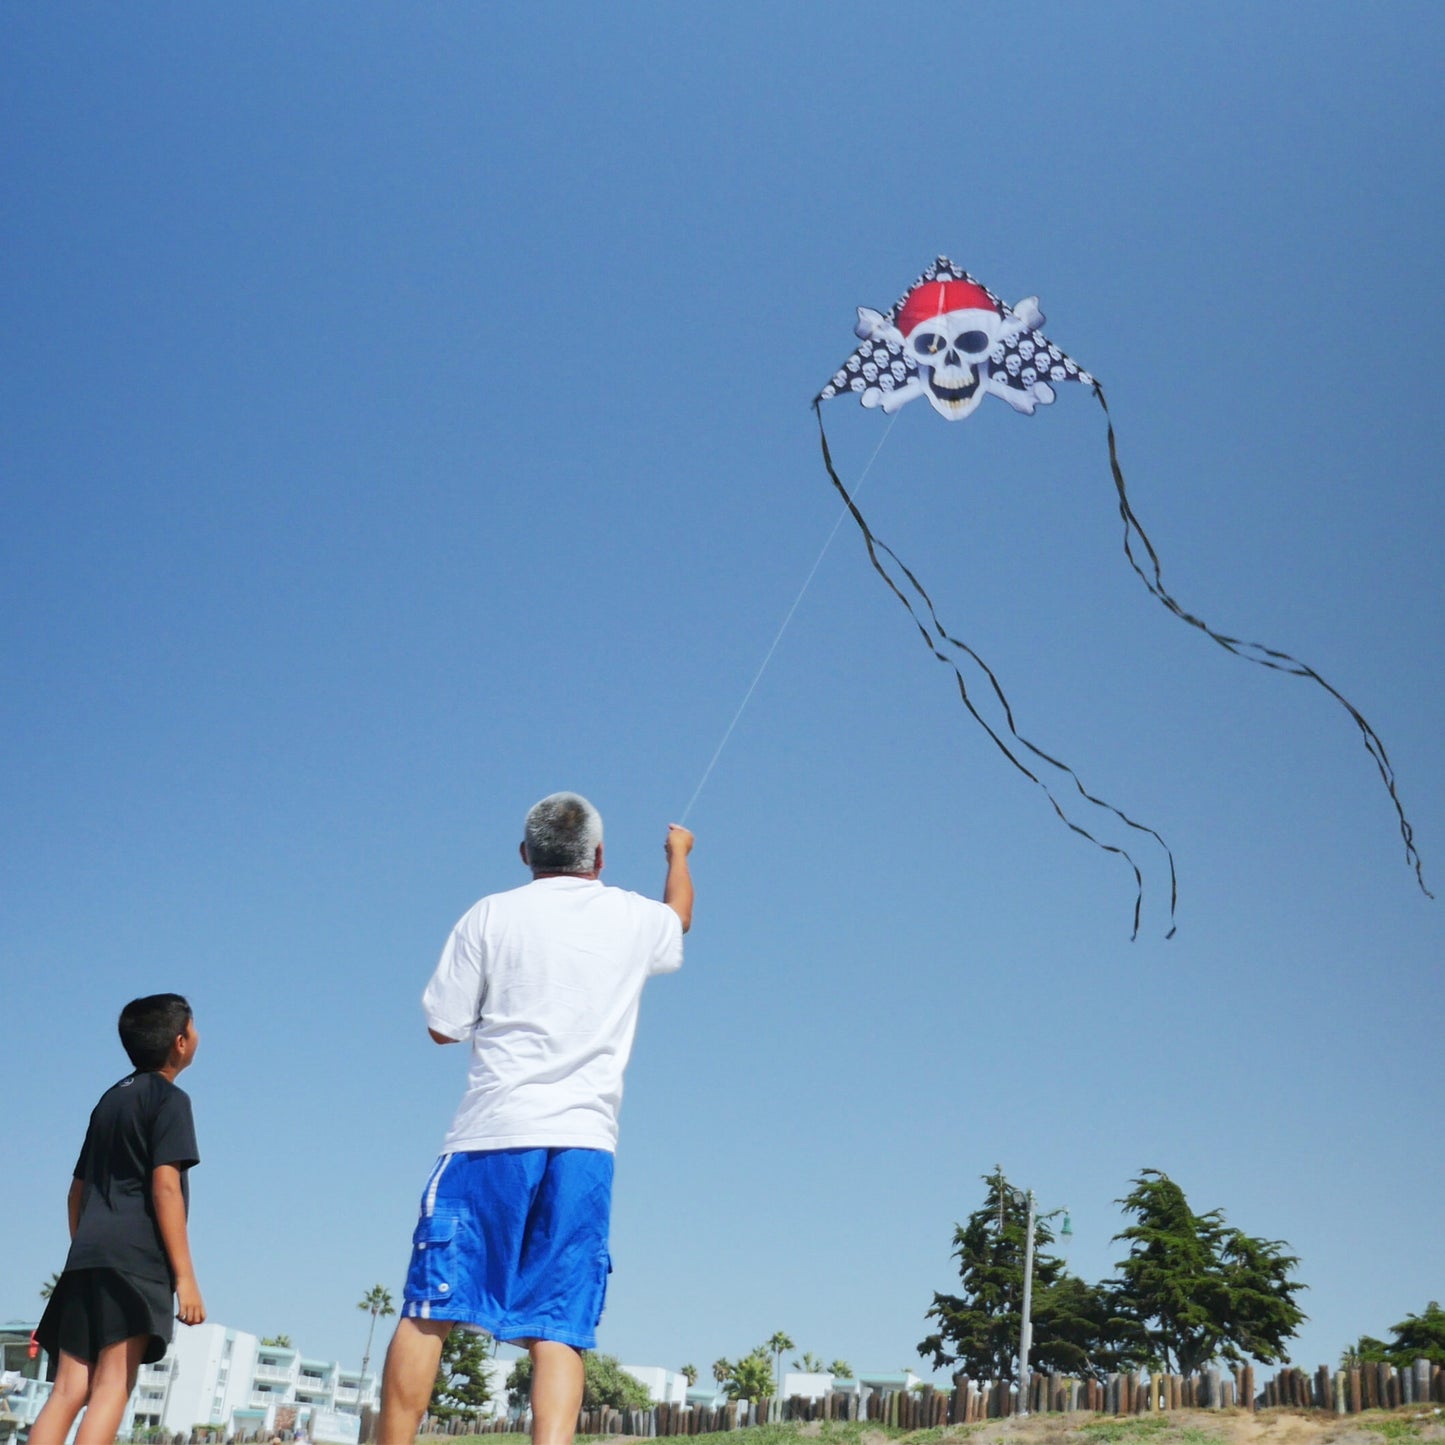 father and son flying skull and bones kite at the park